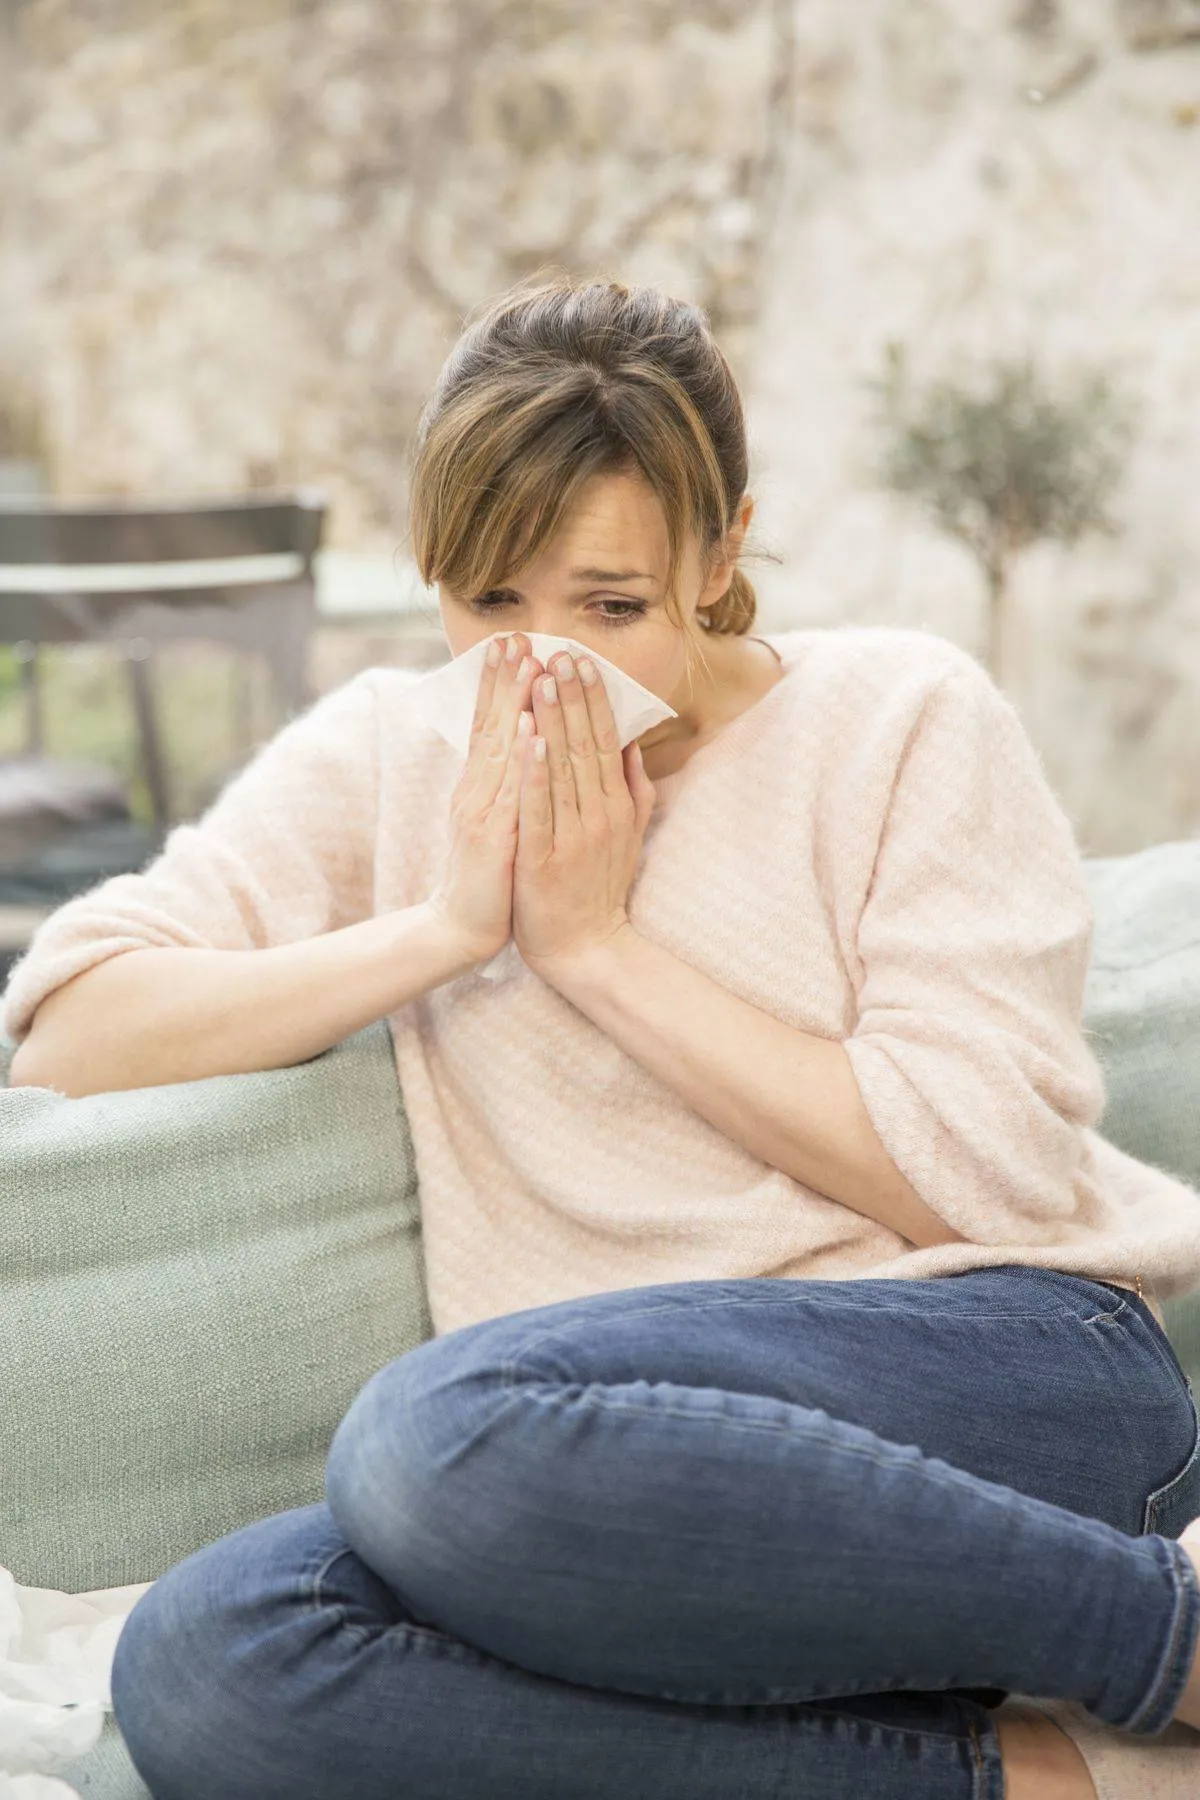 A woman blows her nose after sneezing.